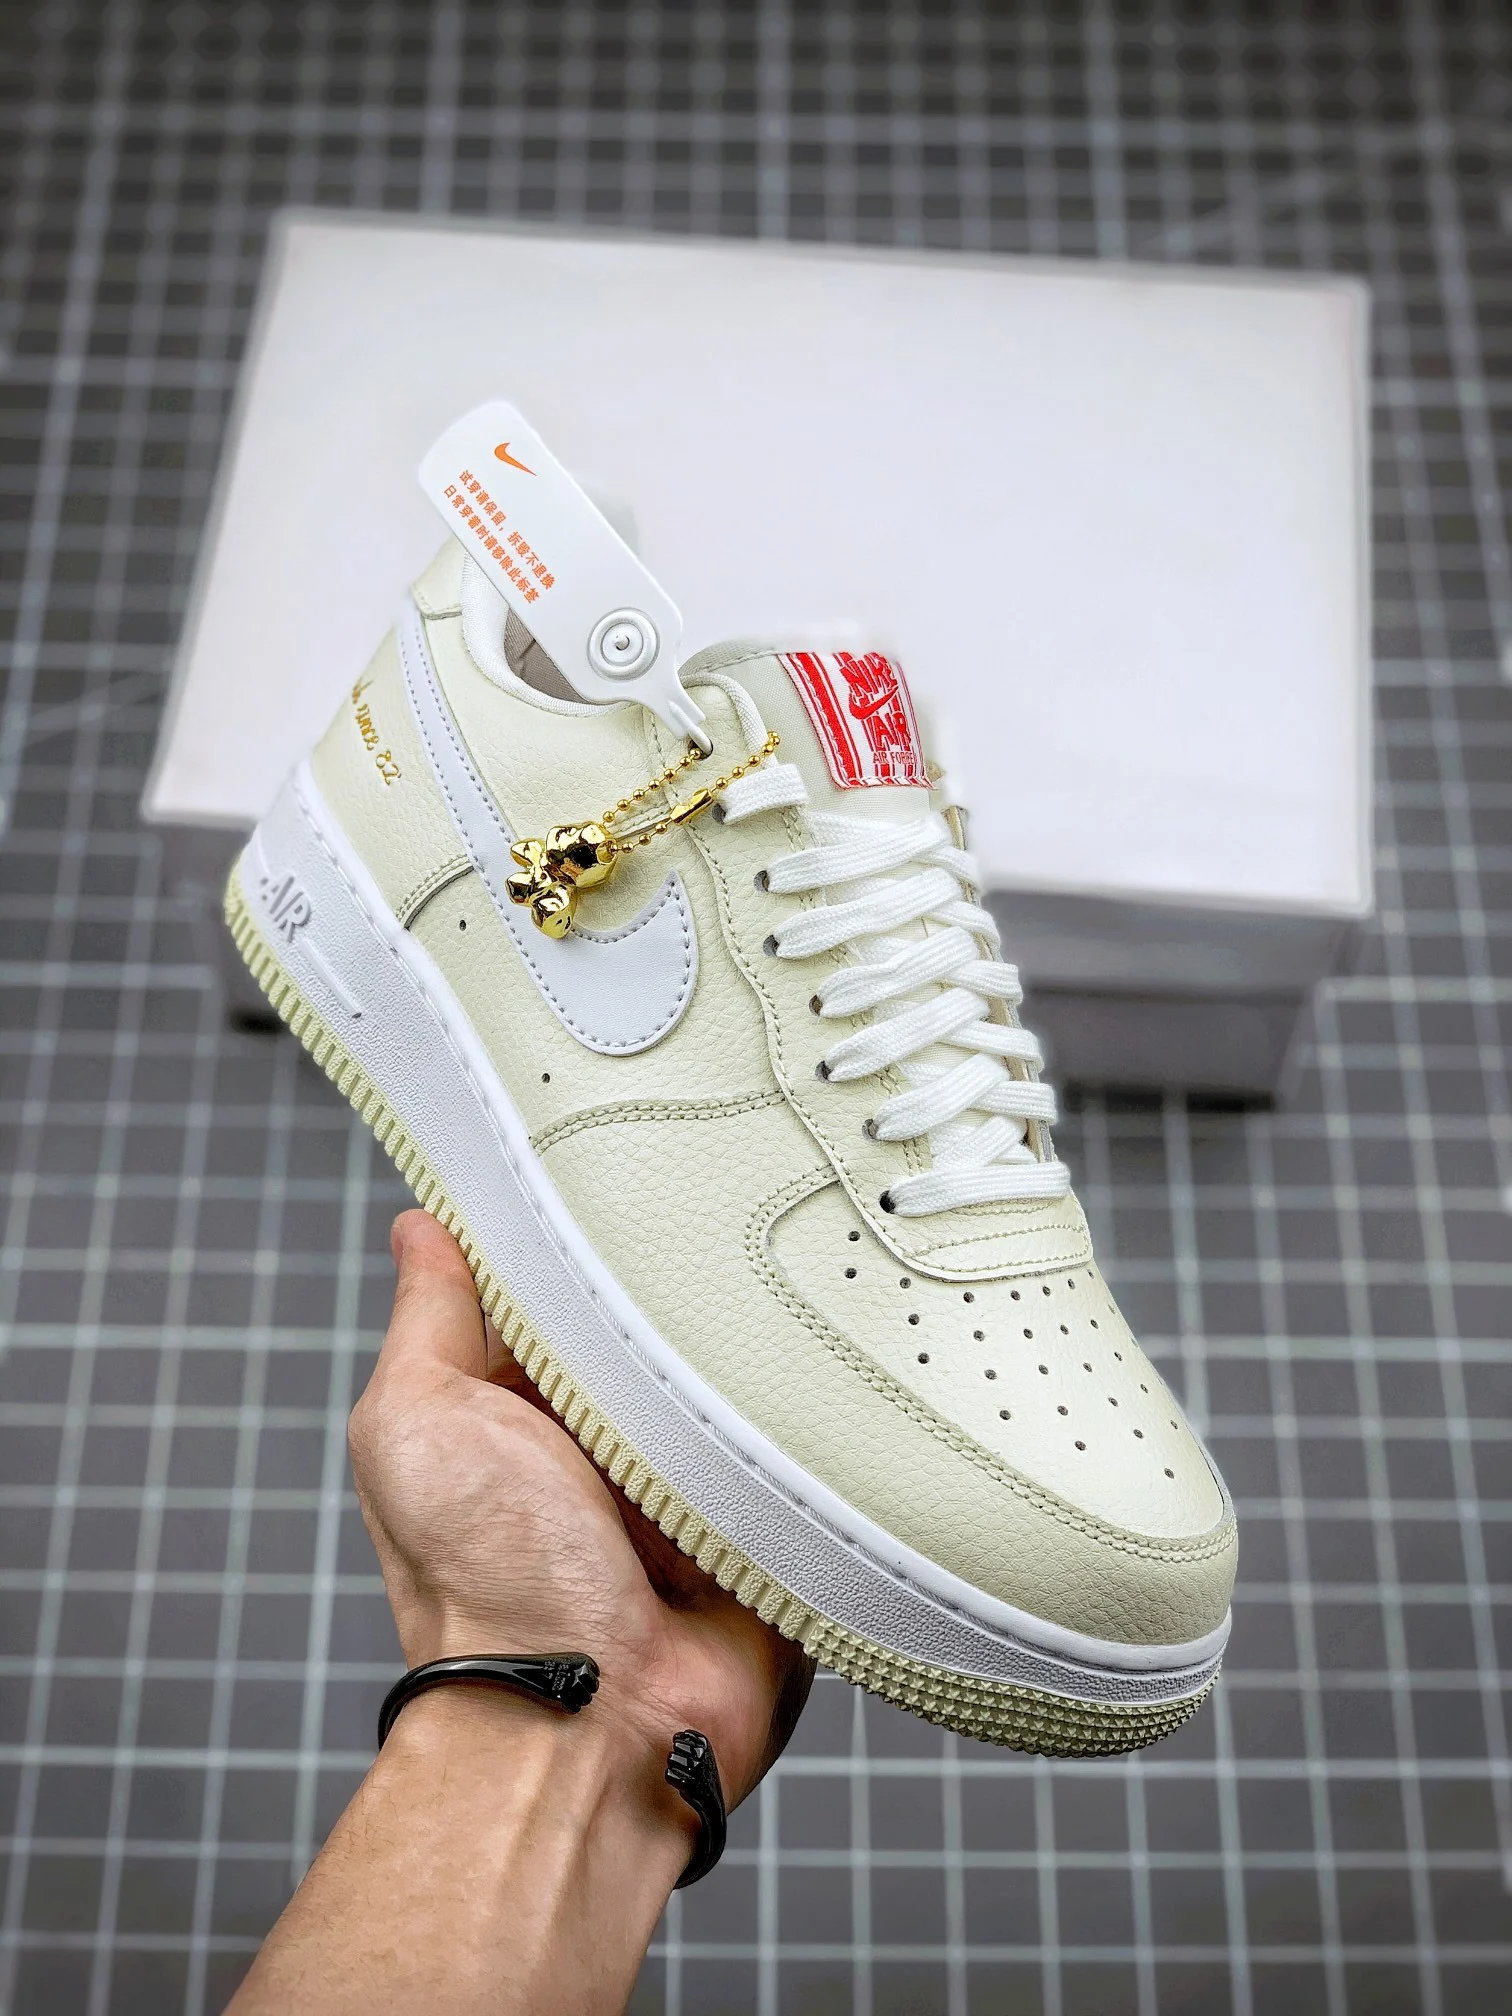 Nike Air Force 1 Low Popcorn Coconut Milk White-University Red For Sale